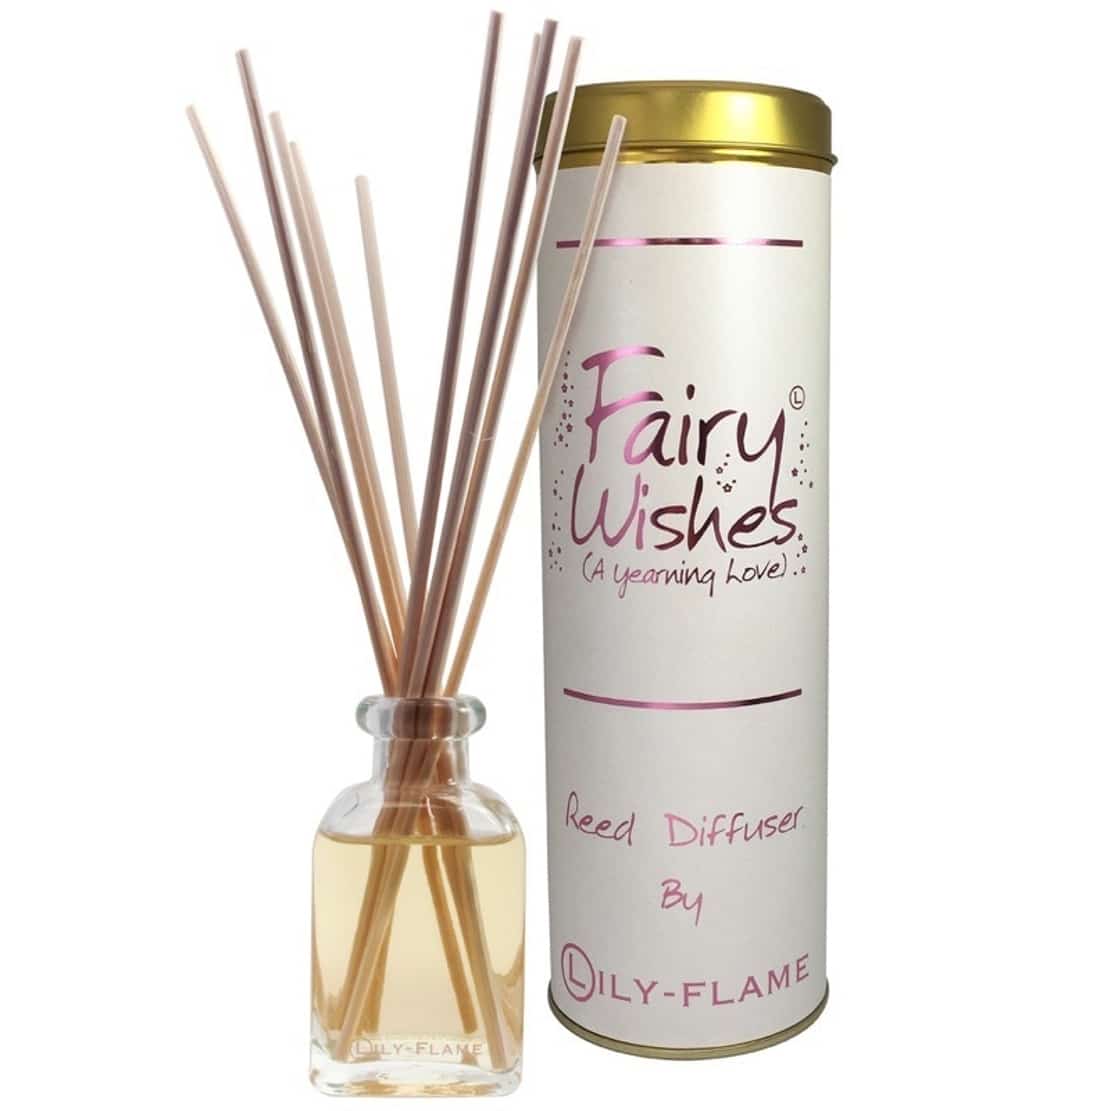 Lily Flame Fairy Wishes Reed Diffuser